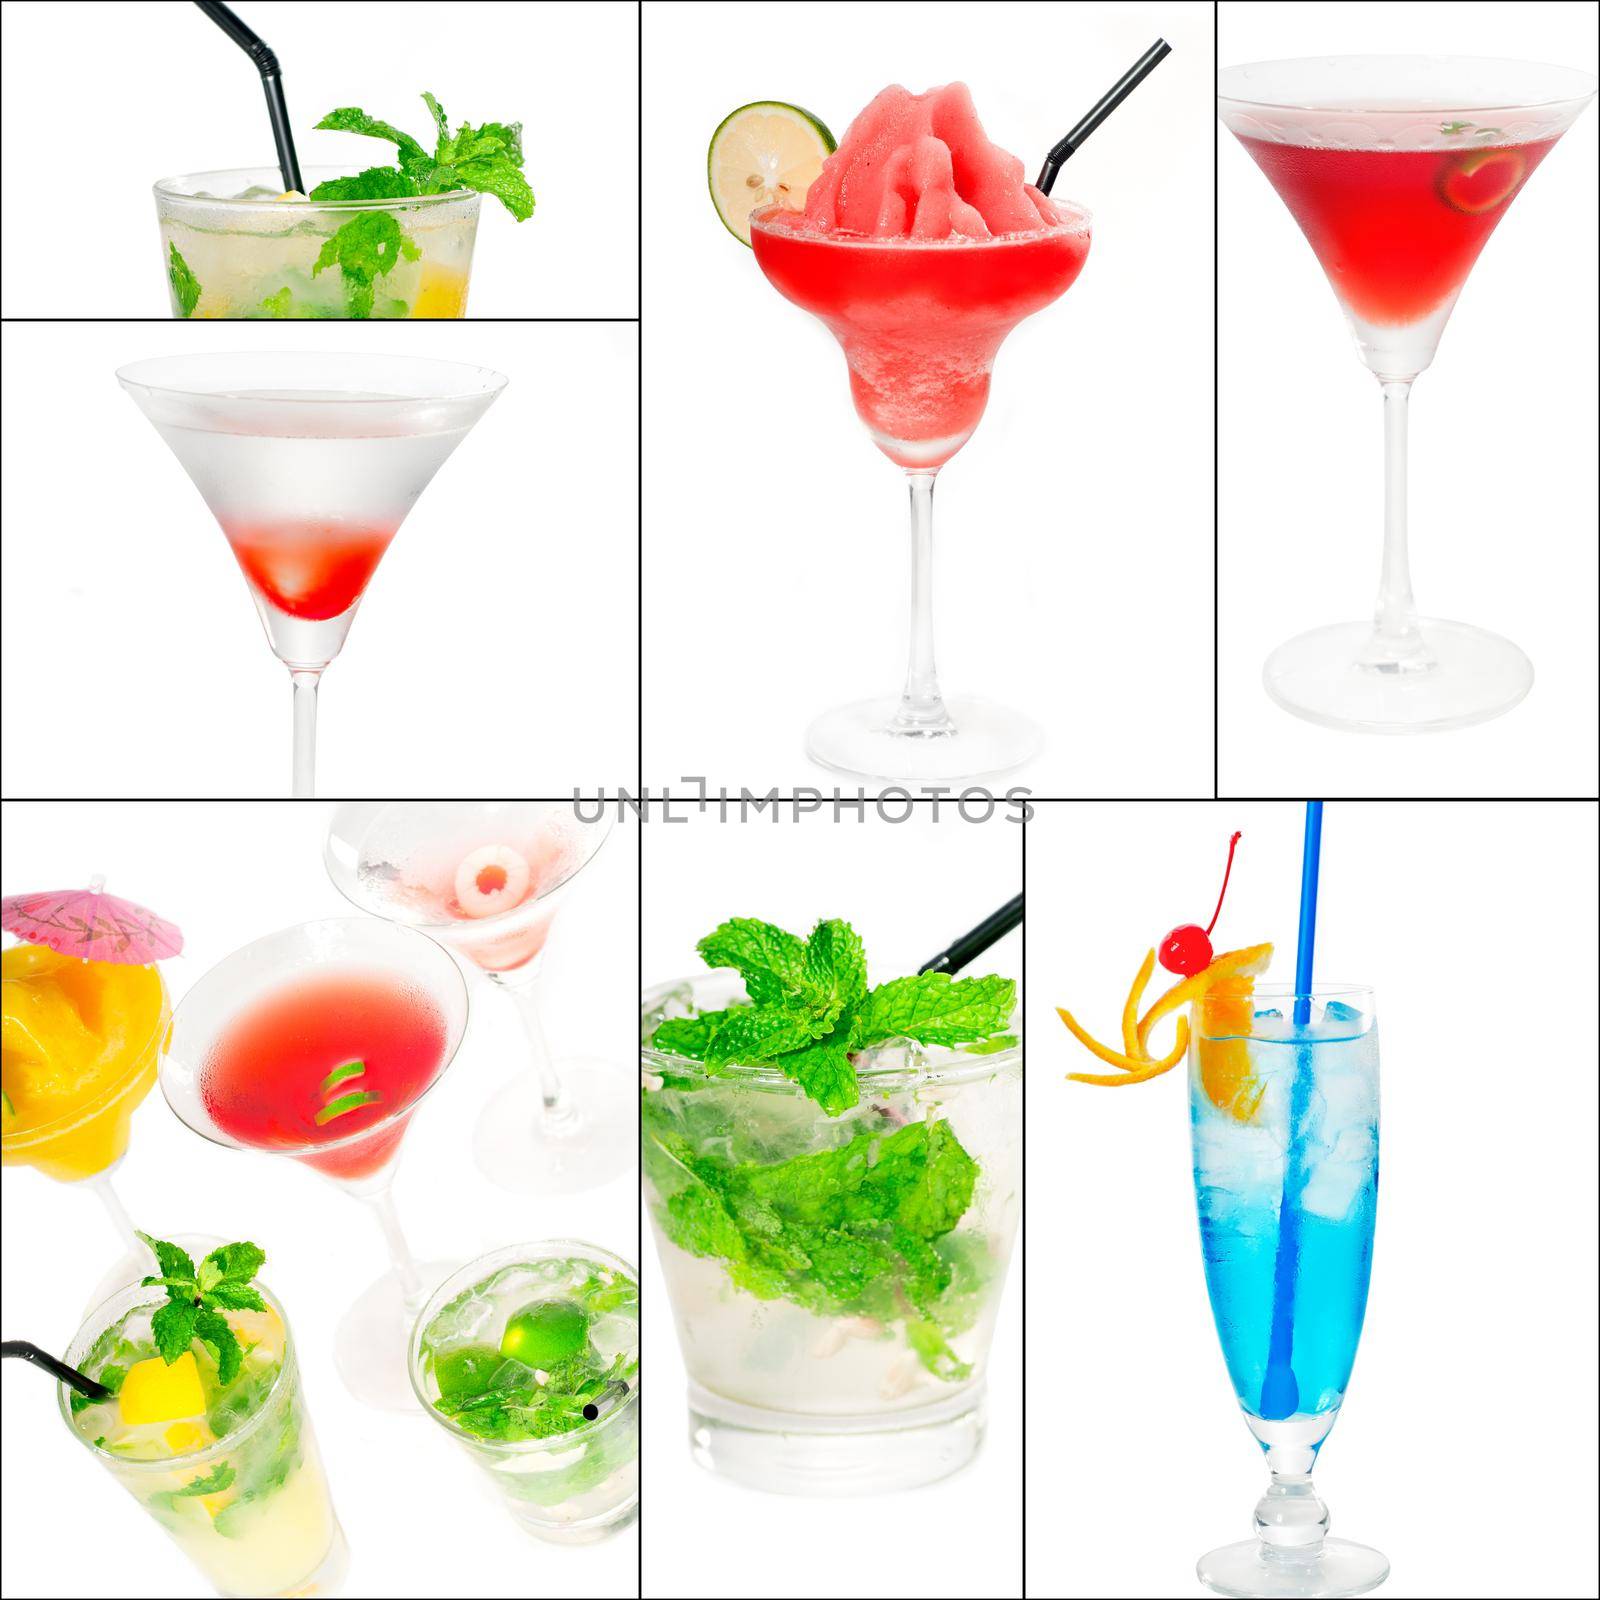 cocktails collage by keko64